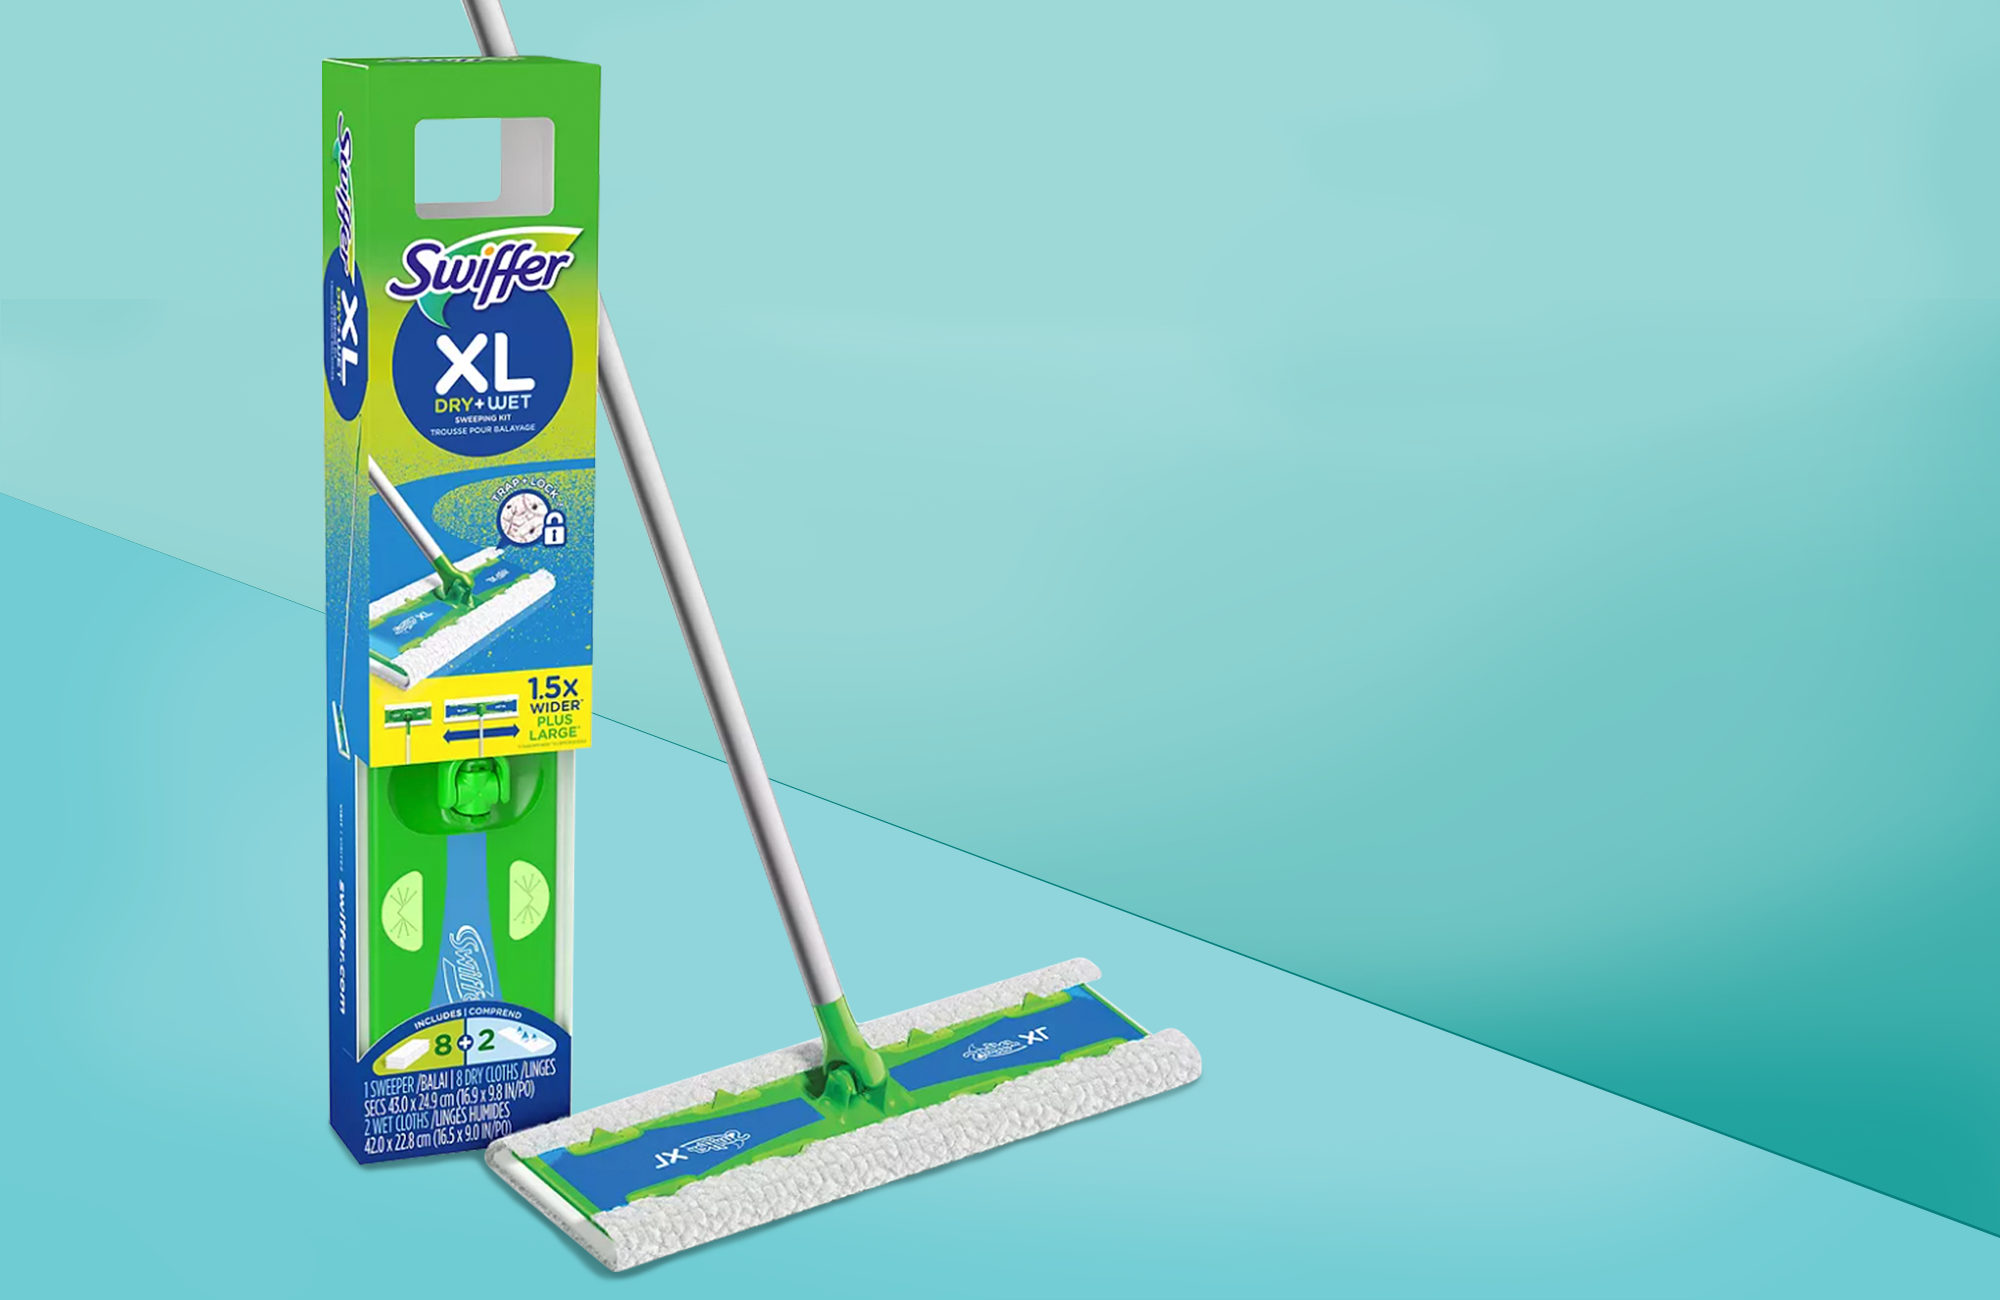 9 Best Mops of 2024 - Reviewed